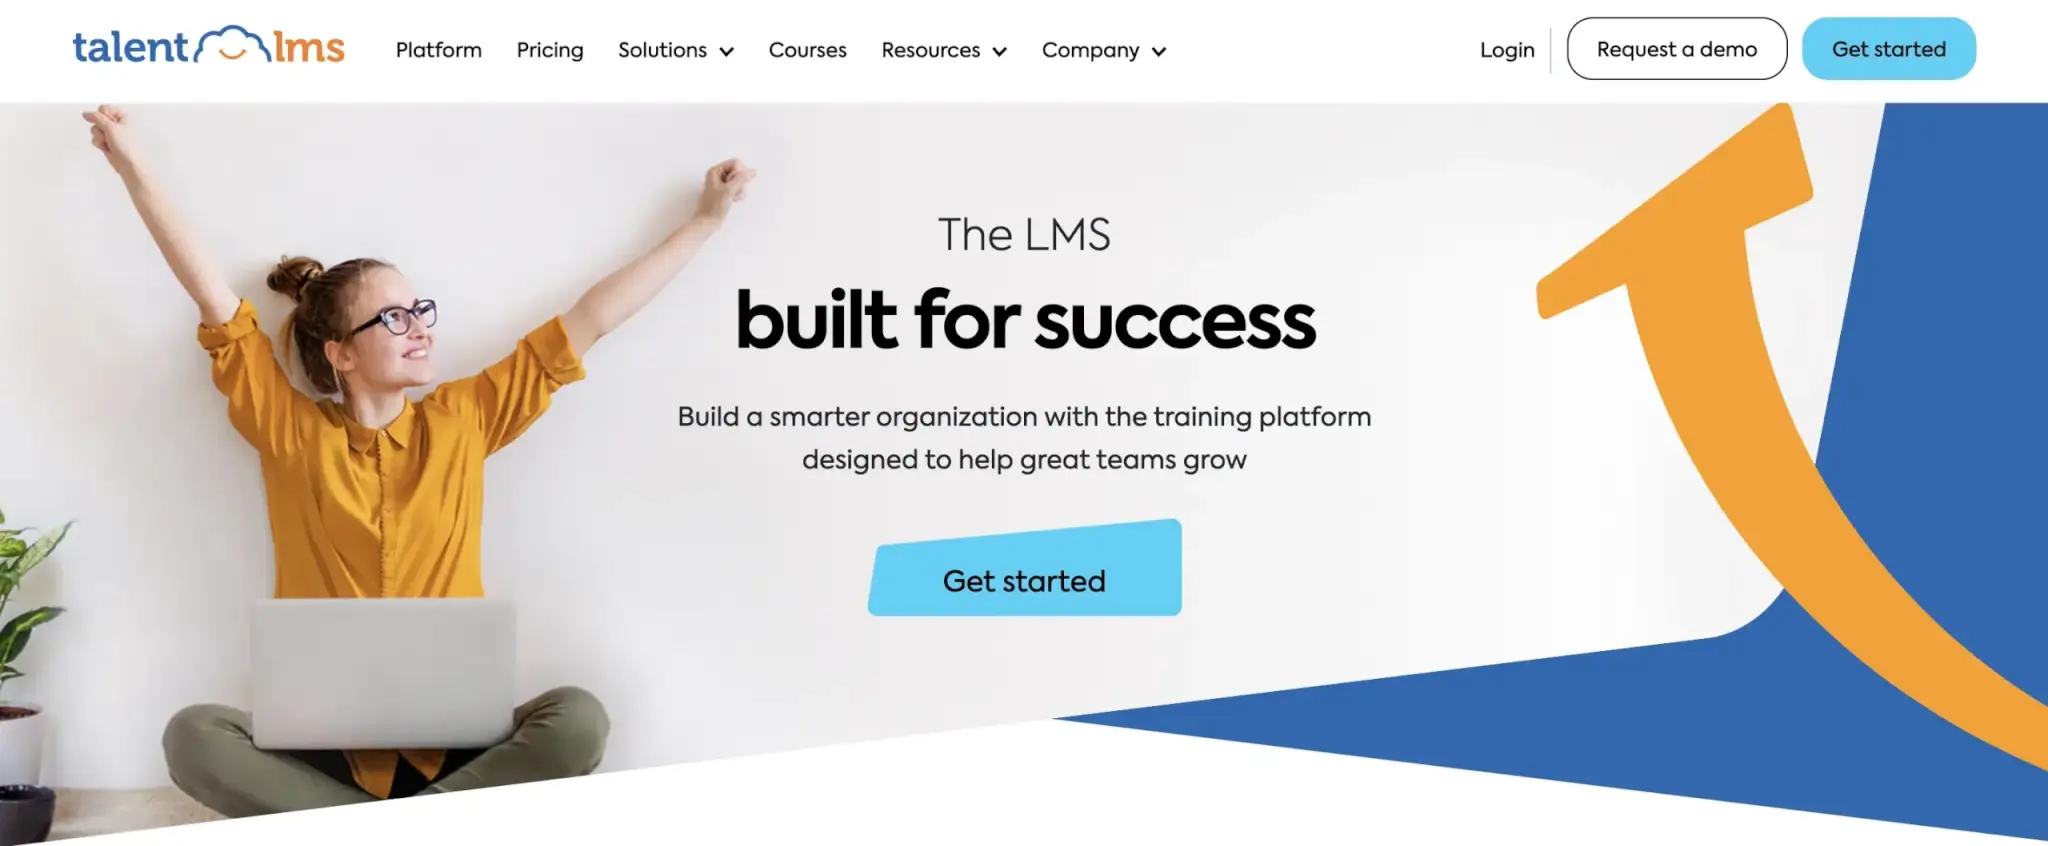 an image of the TalentLMS landing page showing a young woman in orange shirt smiling with her hands stretched out